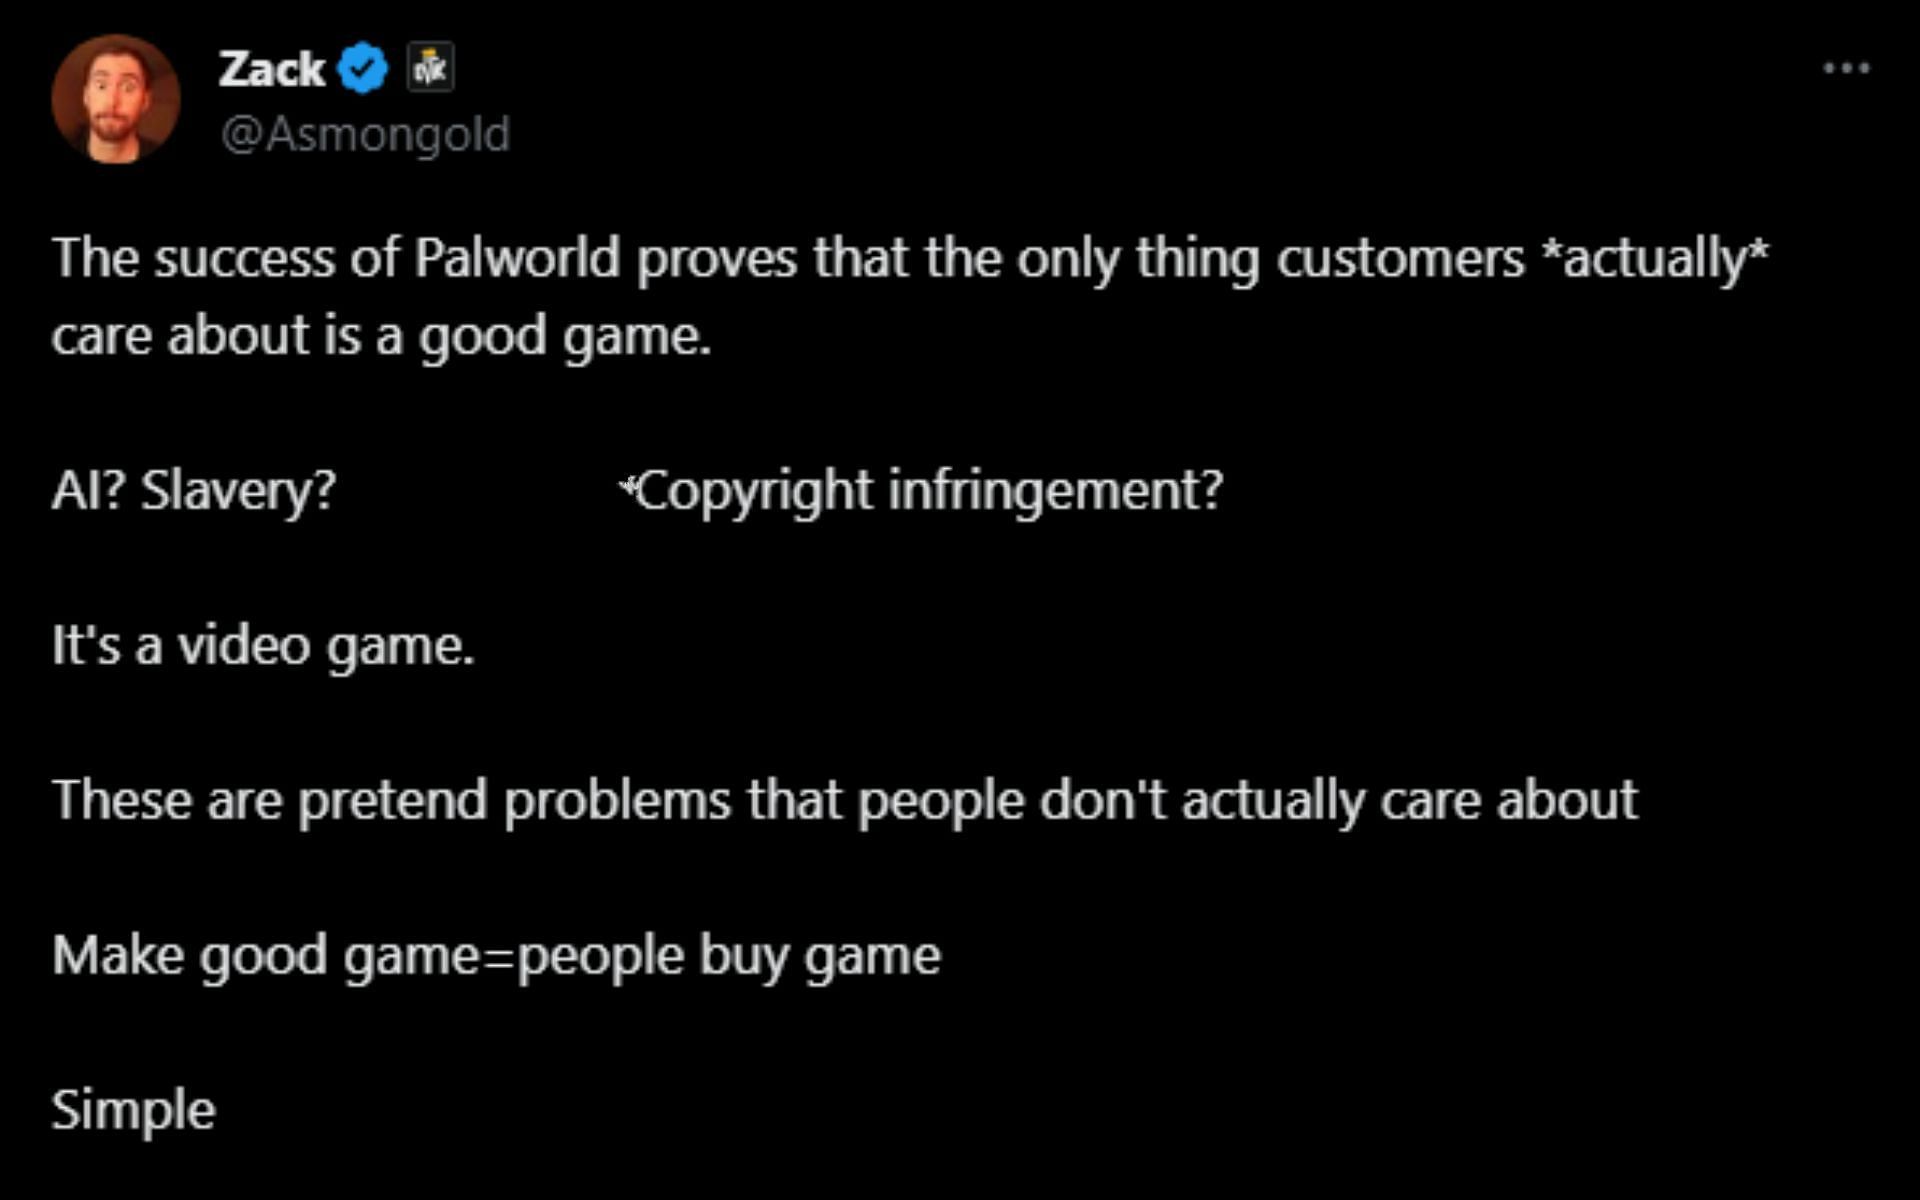 The streamer discusses why Palword is succeeding (Image via X/@Asmongold)